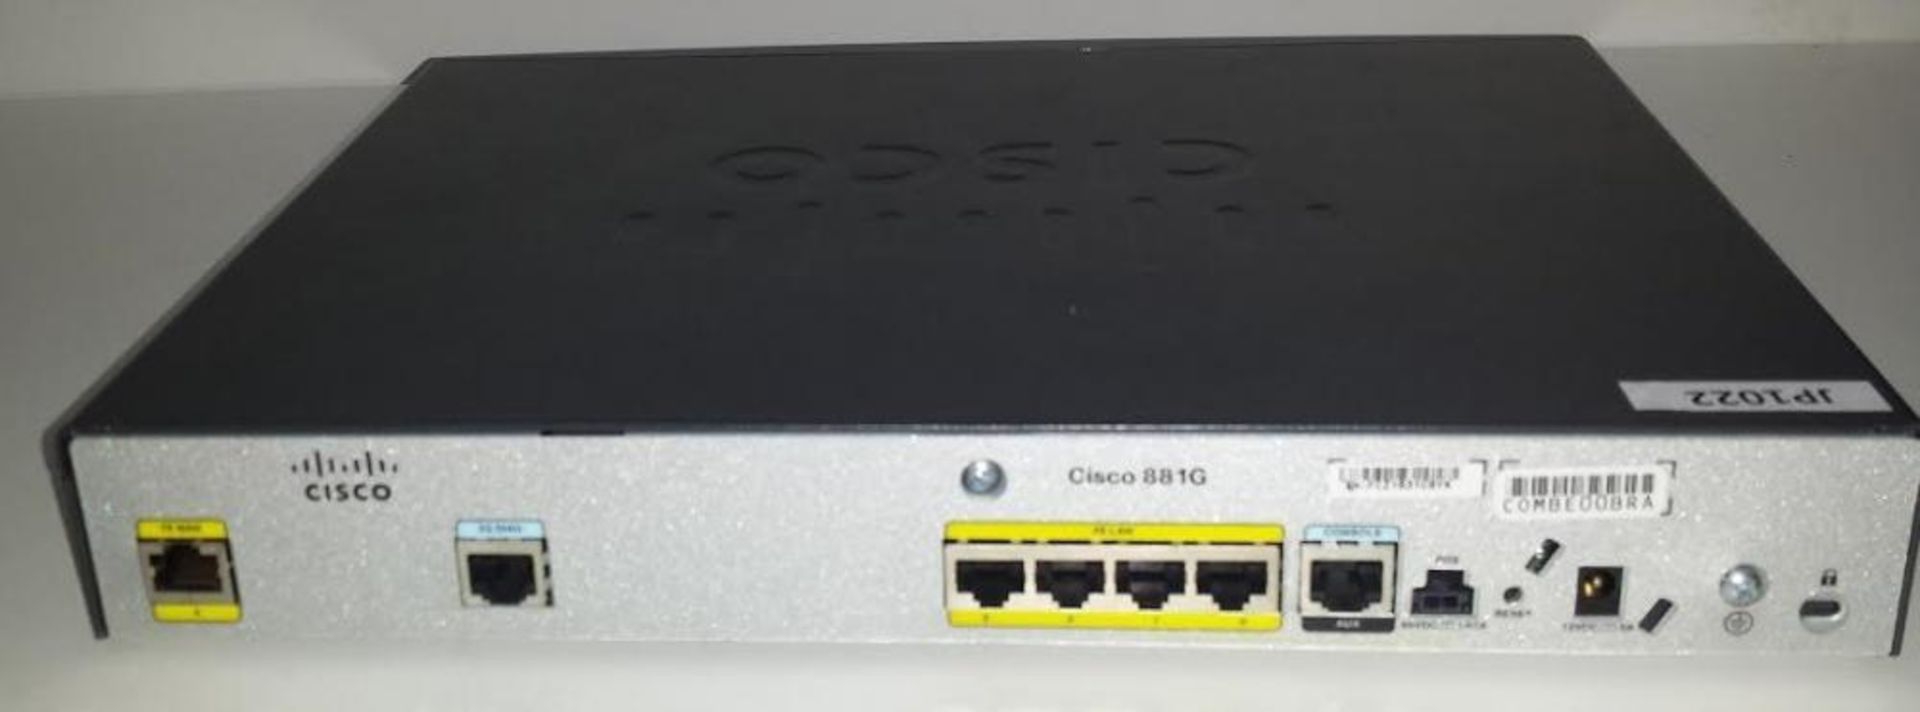 1 x Cisco 881G-K9 Integrated Service Router With PCEX-3G-HSPA-G Module - CL400 - Ref JP1022 - Locati - Image 3 of 5